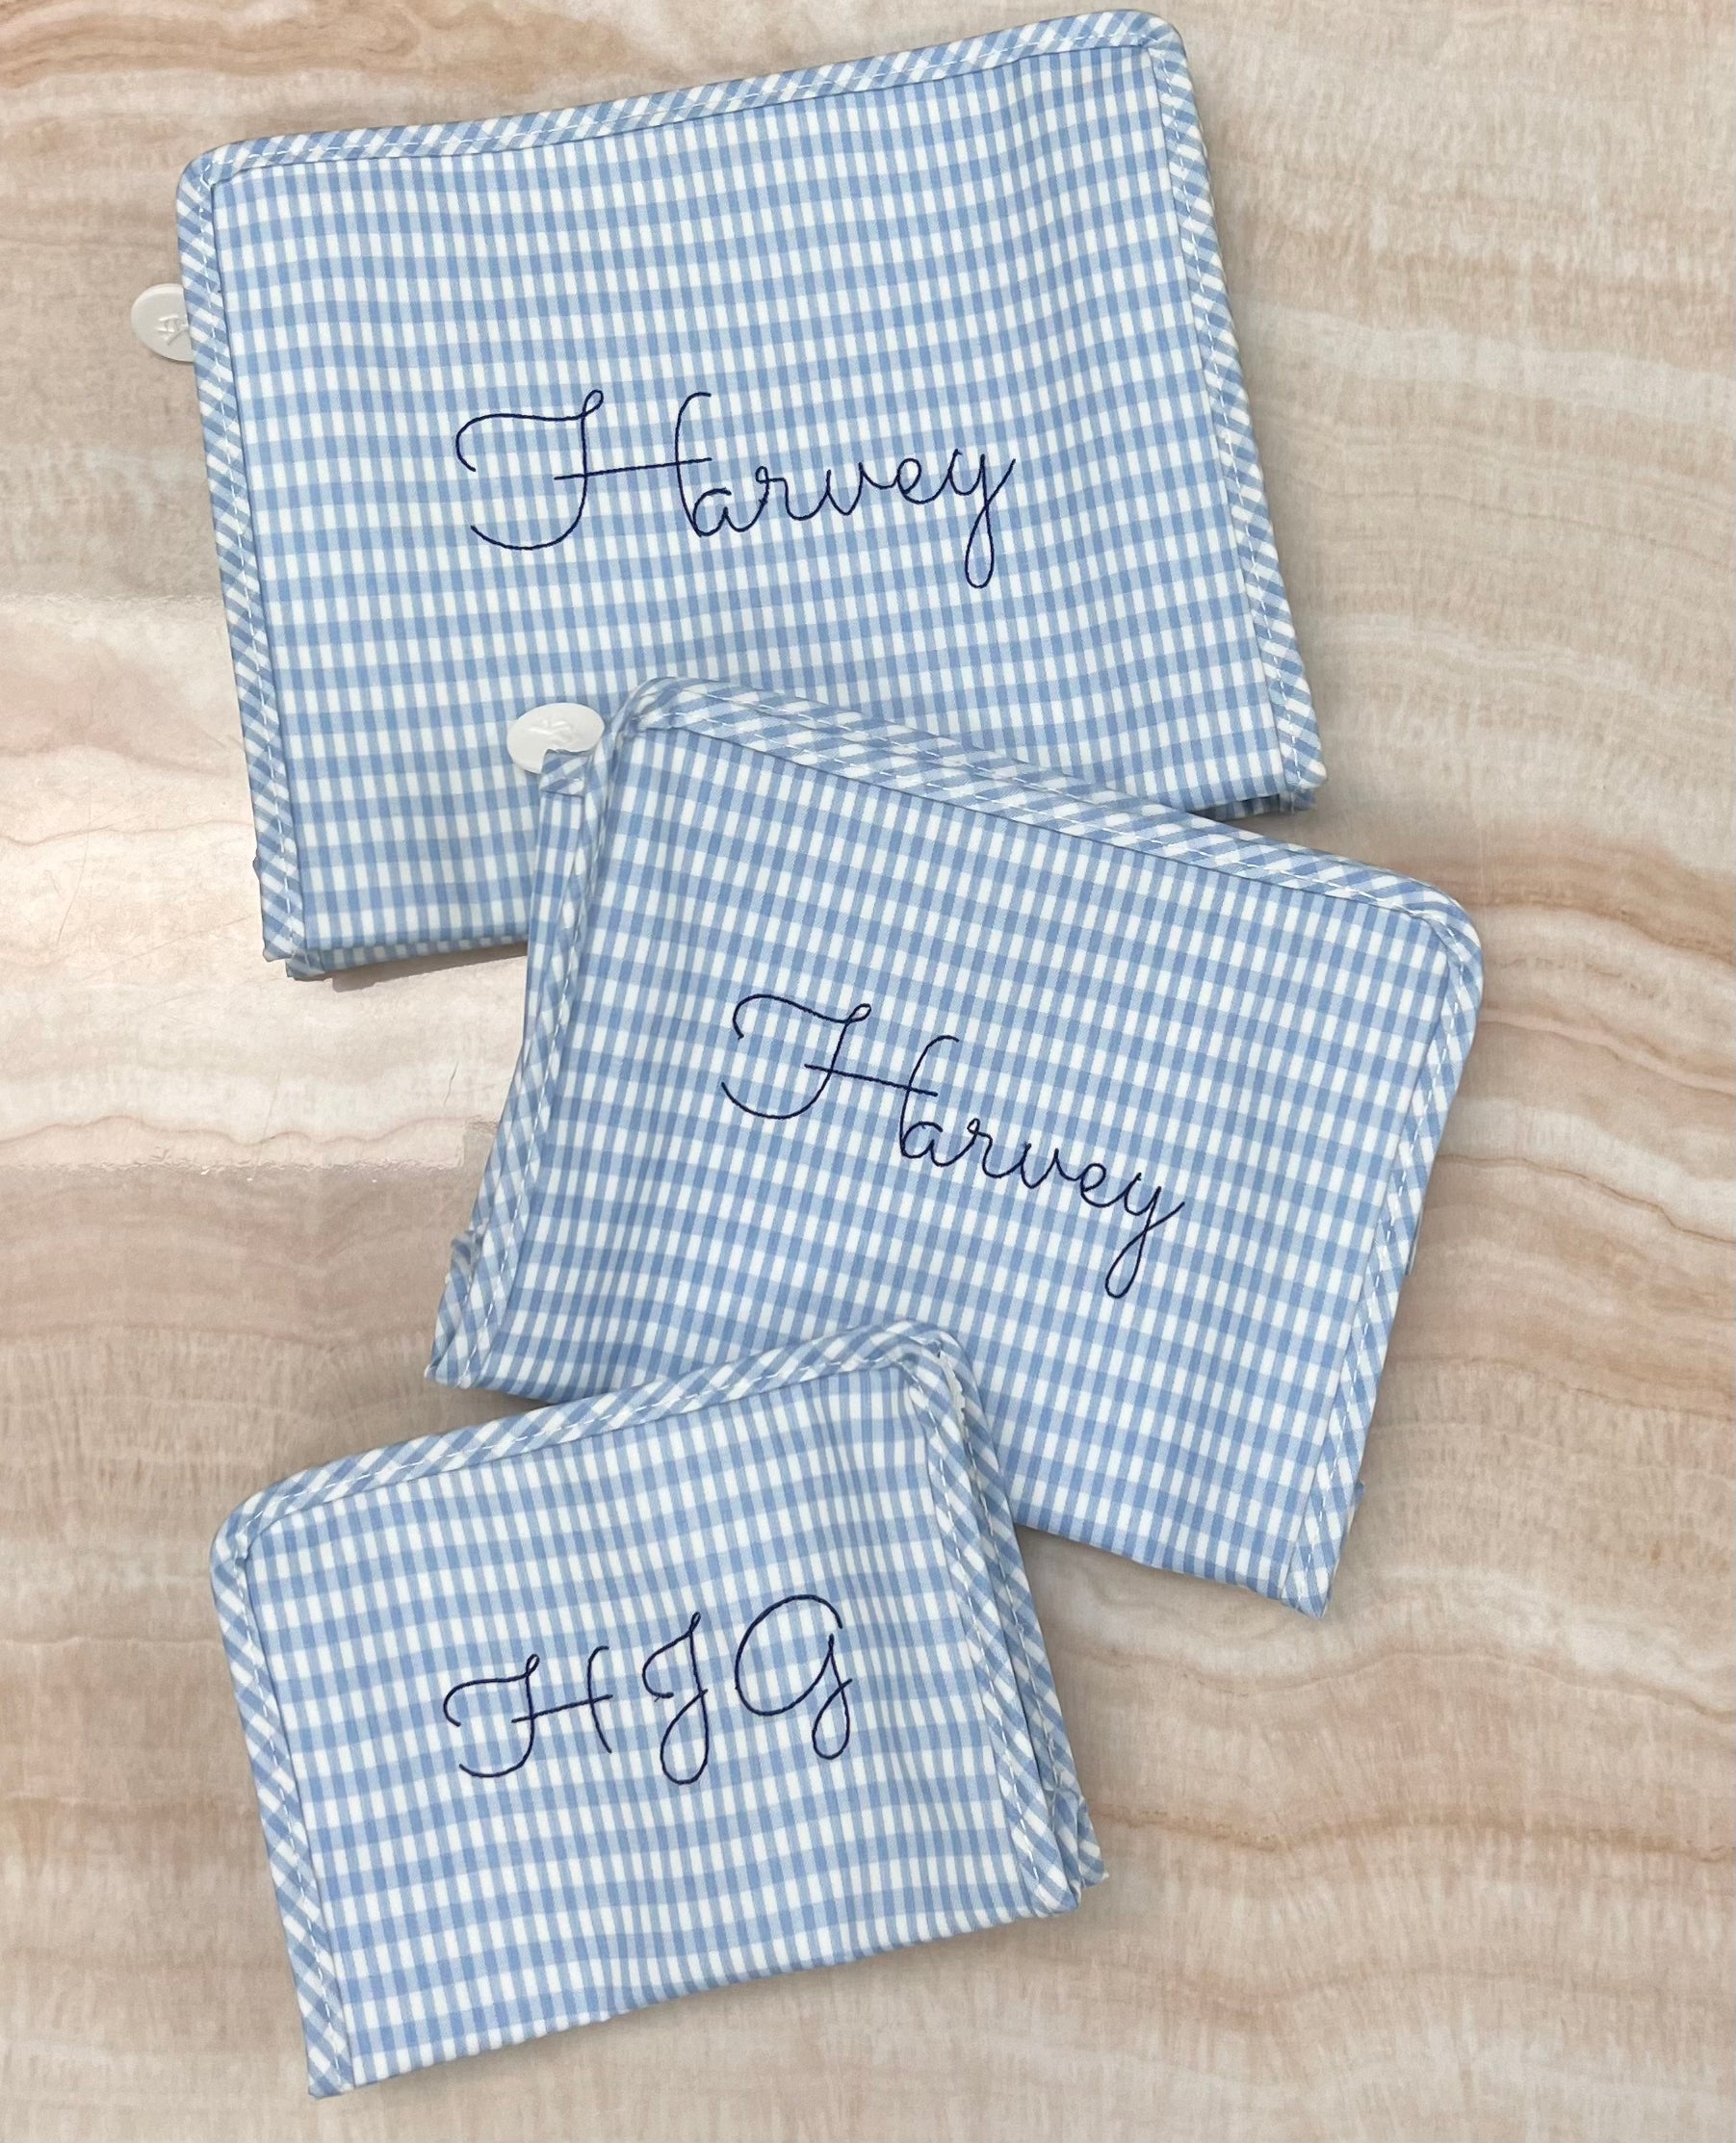 Personalized Nylon Mist Gingham Set of 3 Pouches - Give Wink